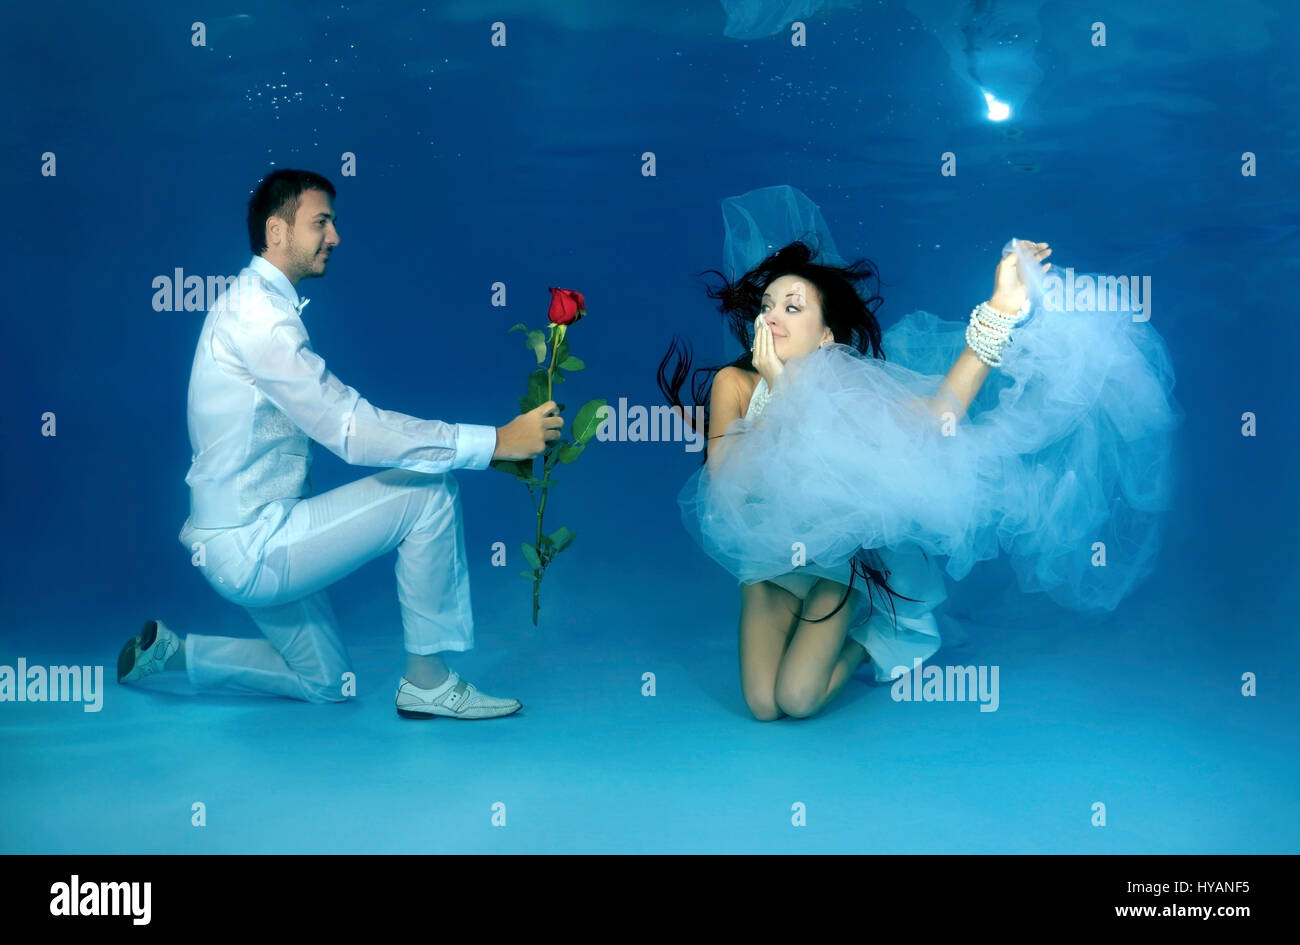 ALL ROUND EXCLUSIVE. ODESSA, UKRAINE: Bride and groom pose for underwater snap showing their courtship. NEWLYWEDS are literally taking the plunge when it comes to commemorating their new marriage. Jumping in at the deep end, these quirky images tell the story of the relationship between DJ Natalia Kol (26) and Designer Viacheslav Kol (28) from Odessa, Ukraine, from courtship to marriage – while three-feet underwater.  Pictures show how the groom wins over the bride with a red rose and goes down on one knee for the big proposal. We can also see the make-up artist going to work on the big day, a Stock Photo